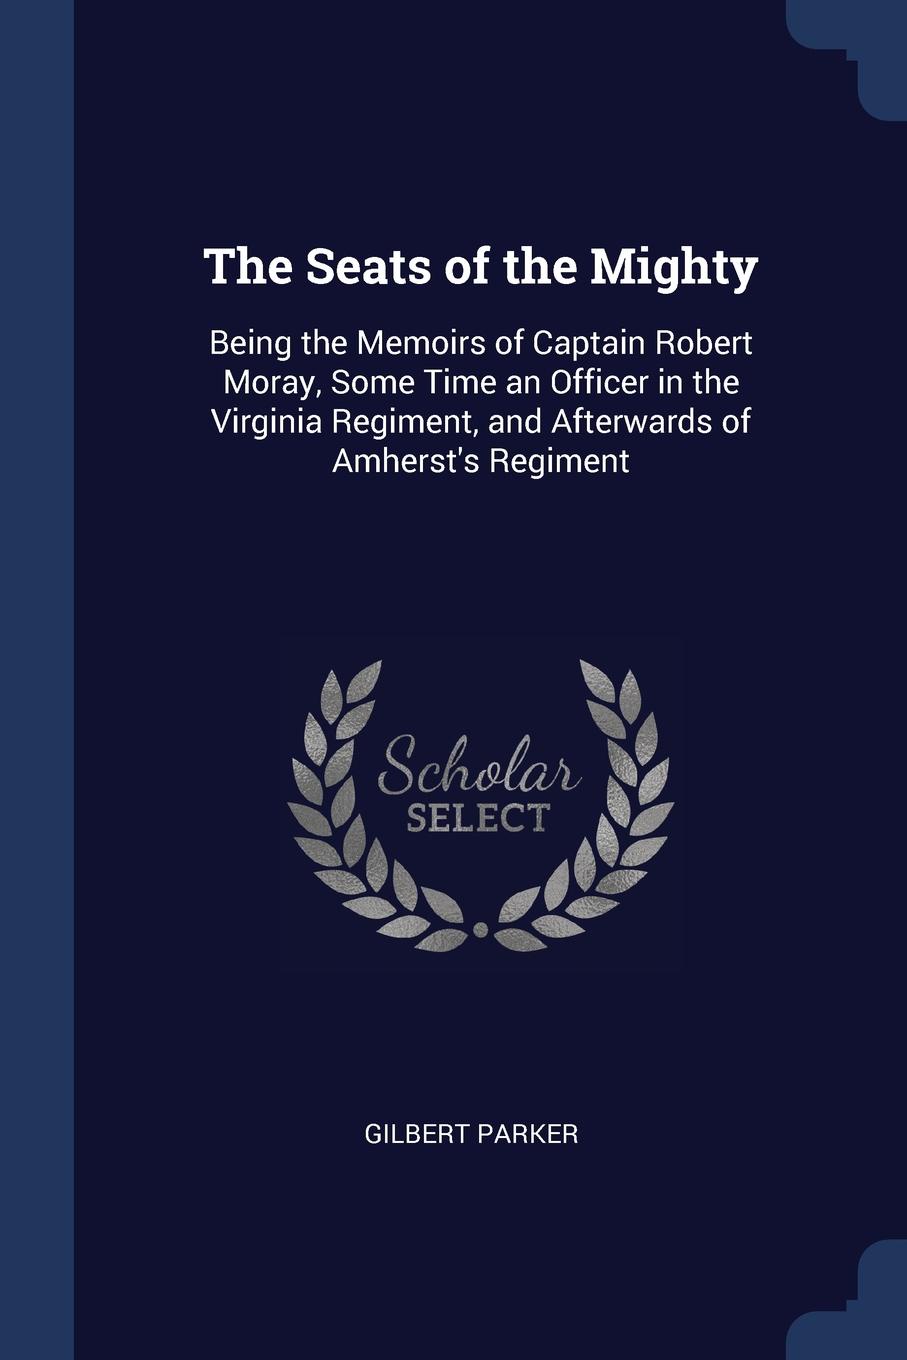 The Seats of the Mighty. Being the Memoirs of Captain Robert Moray, Some Time an Officer in the Virginia Regiment, and Afterwards of Amherst.s Regiment